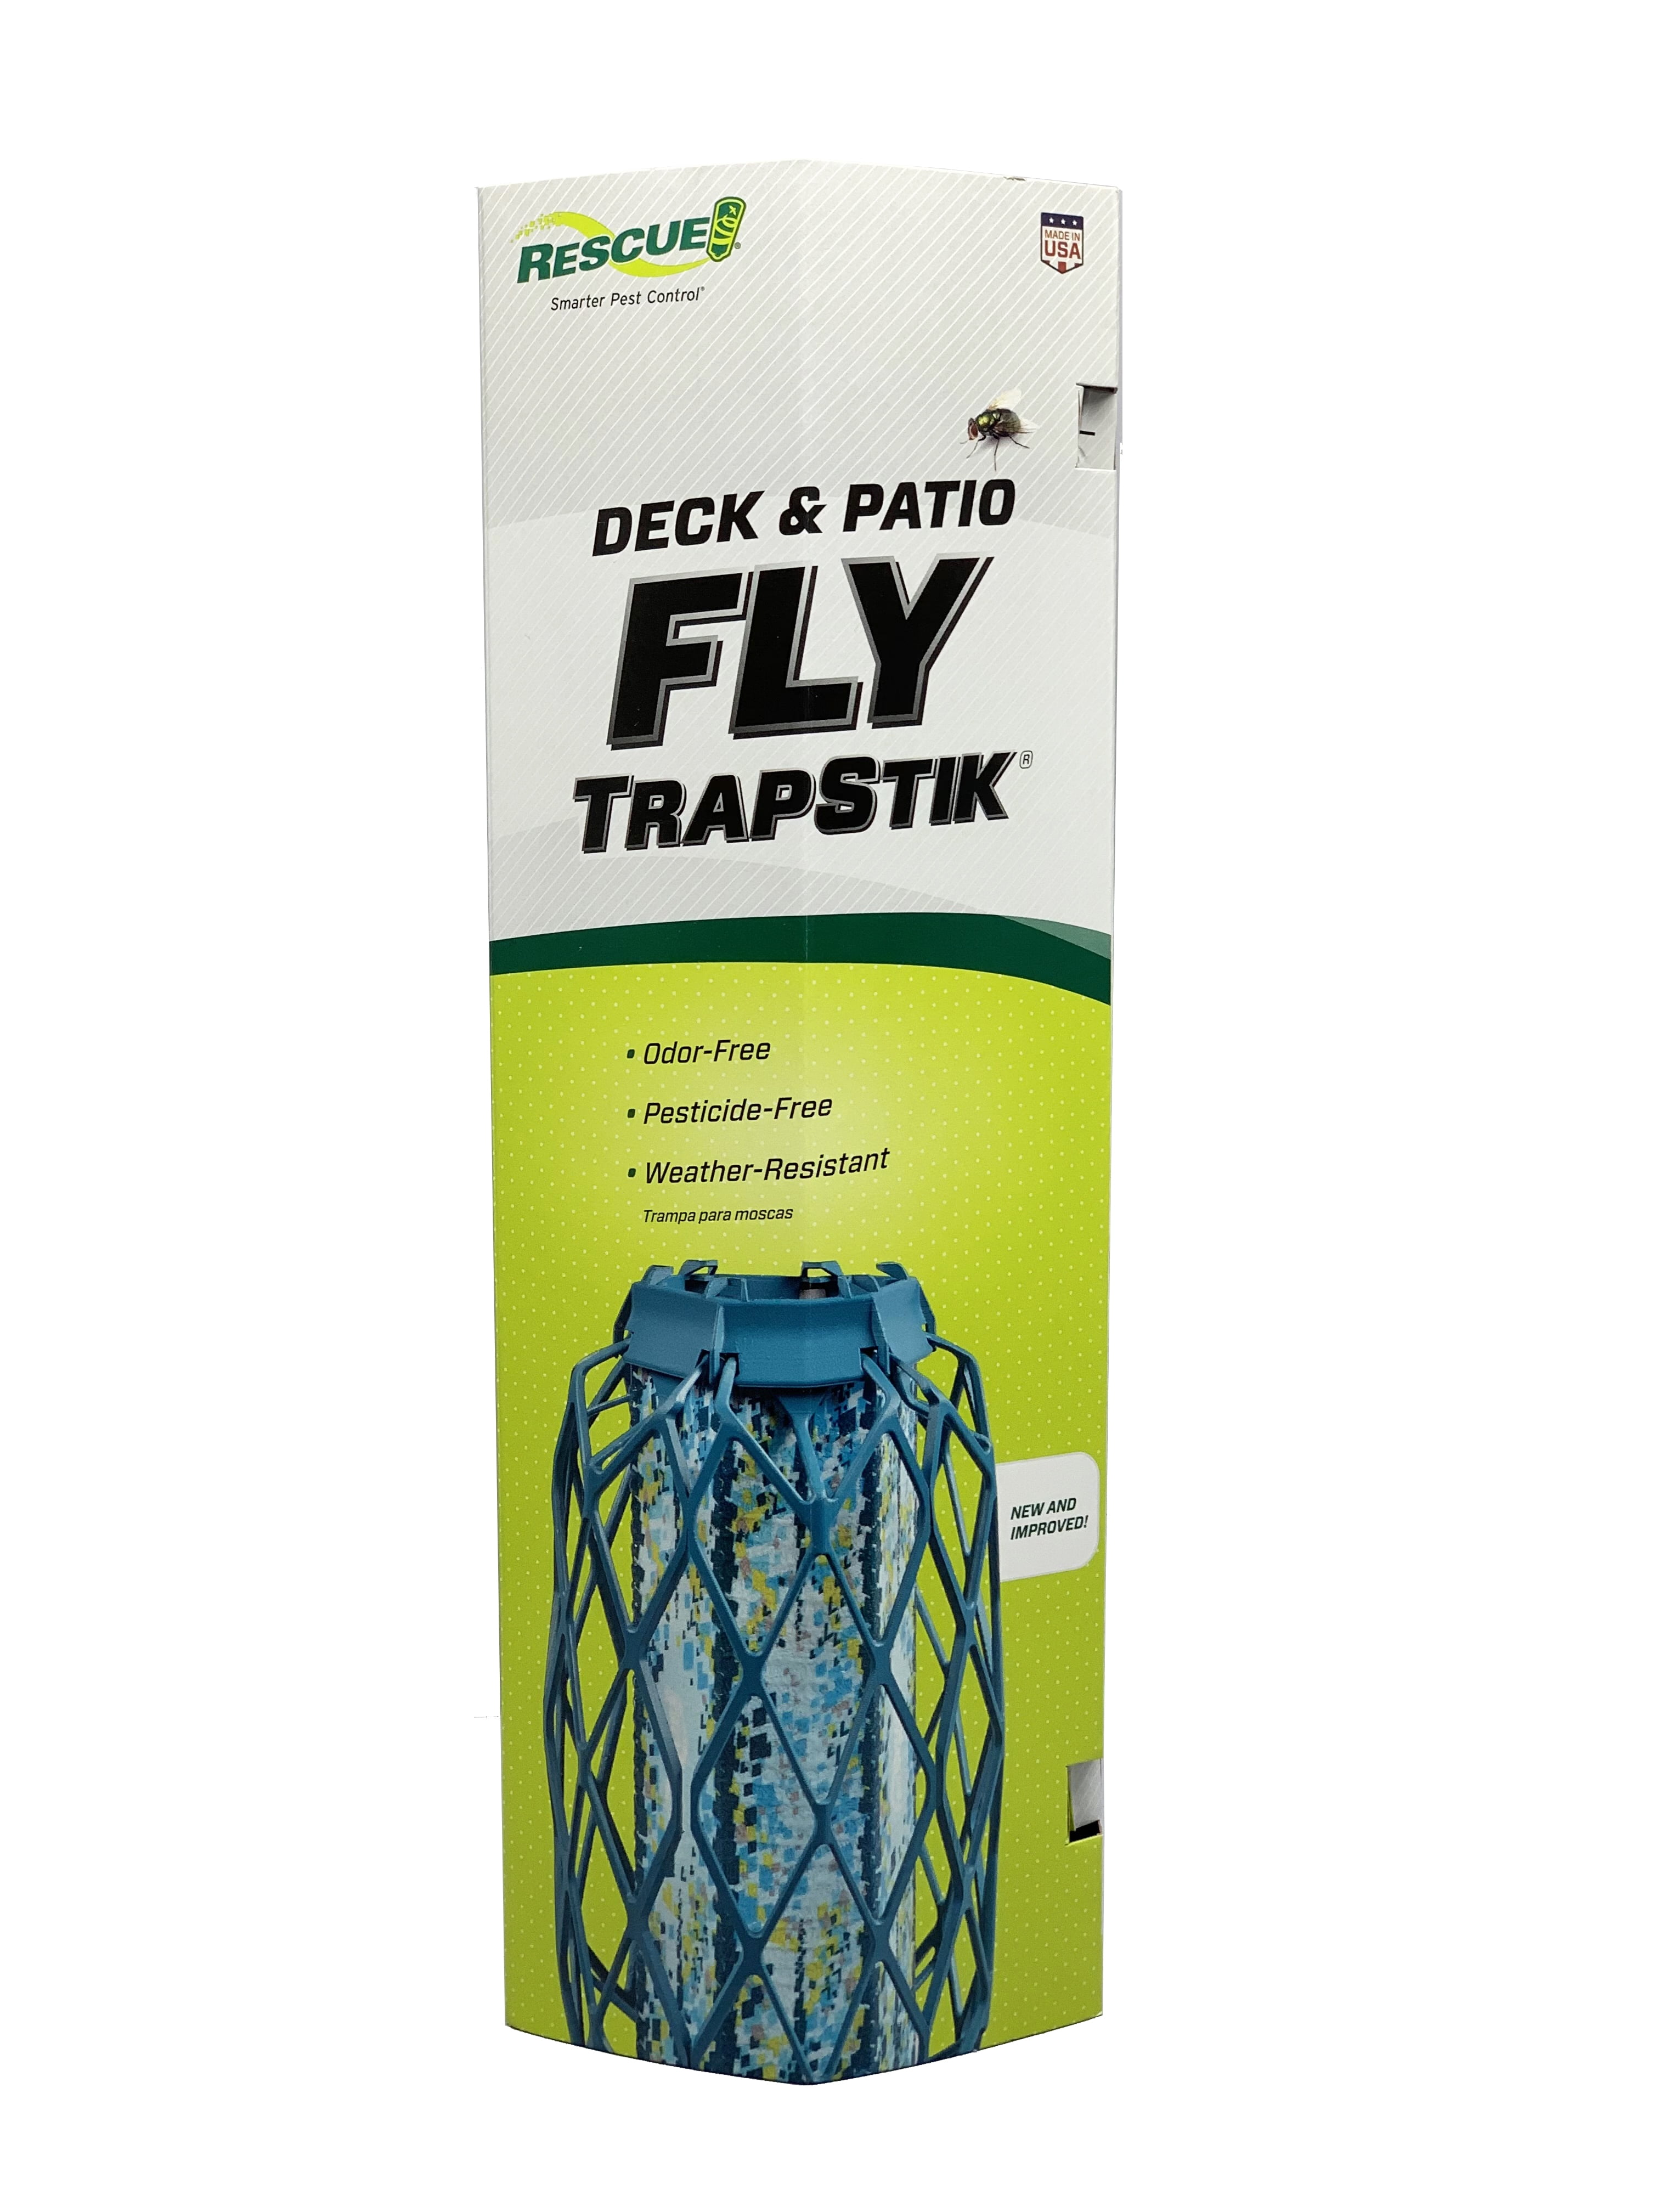 RESCUE! Outdoor Deck and Patio TrapStik Fly Trap for Biting Flies, 1 Trap